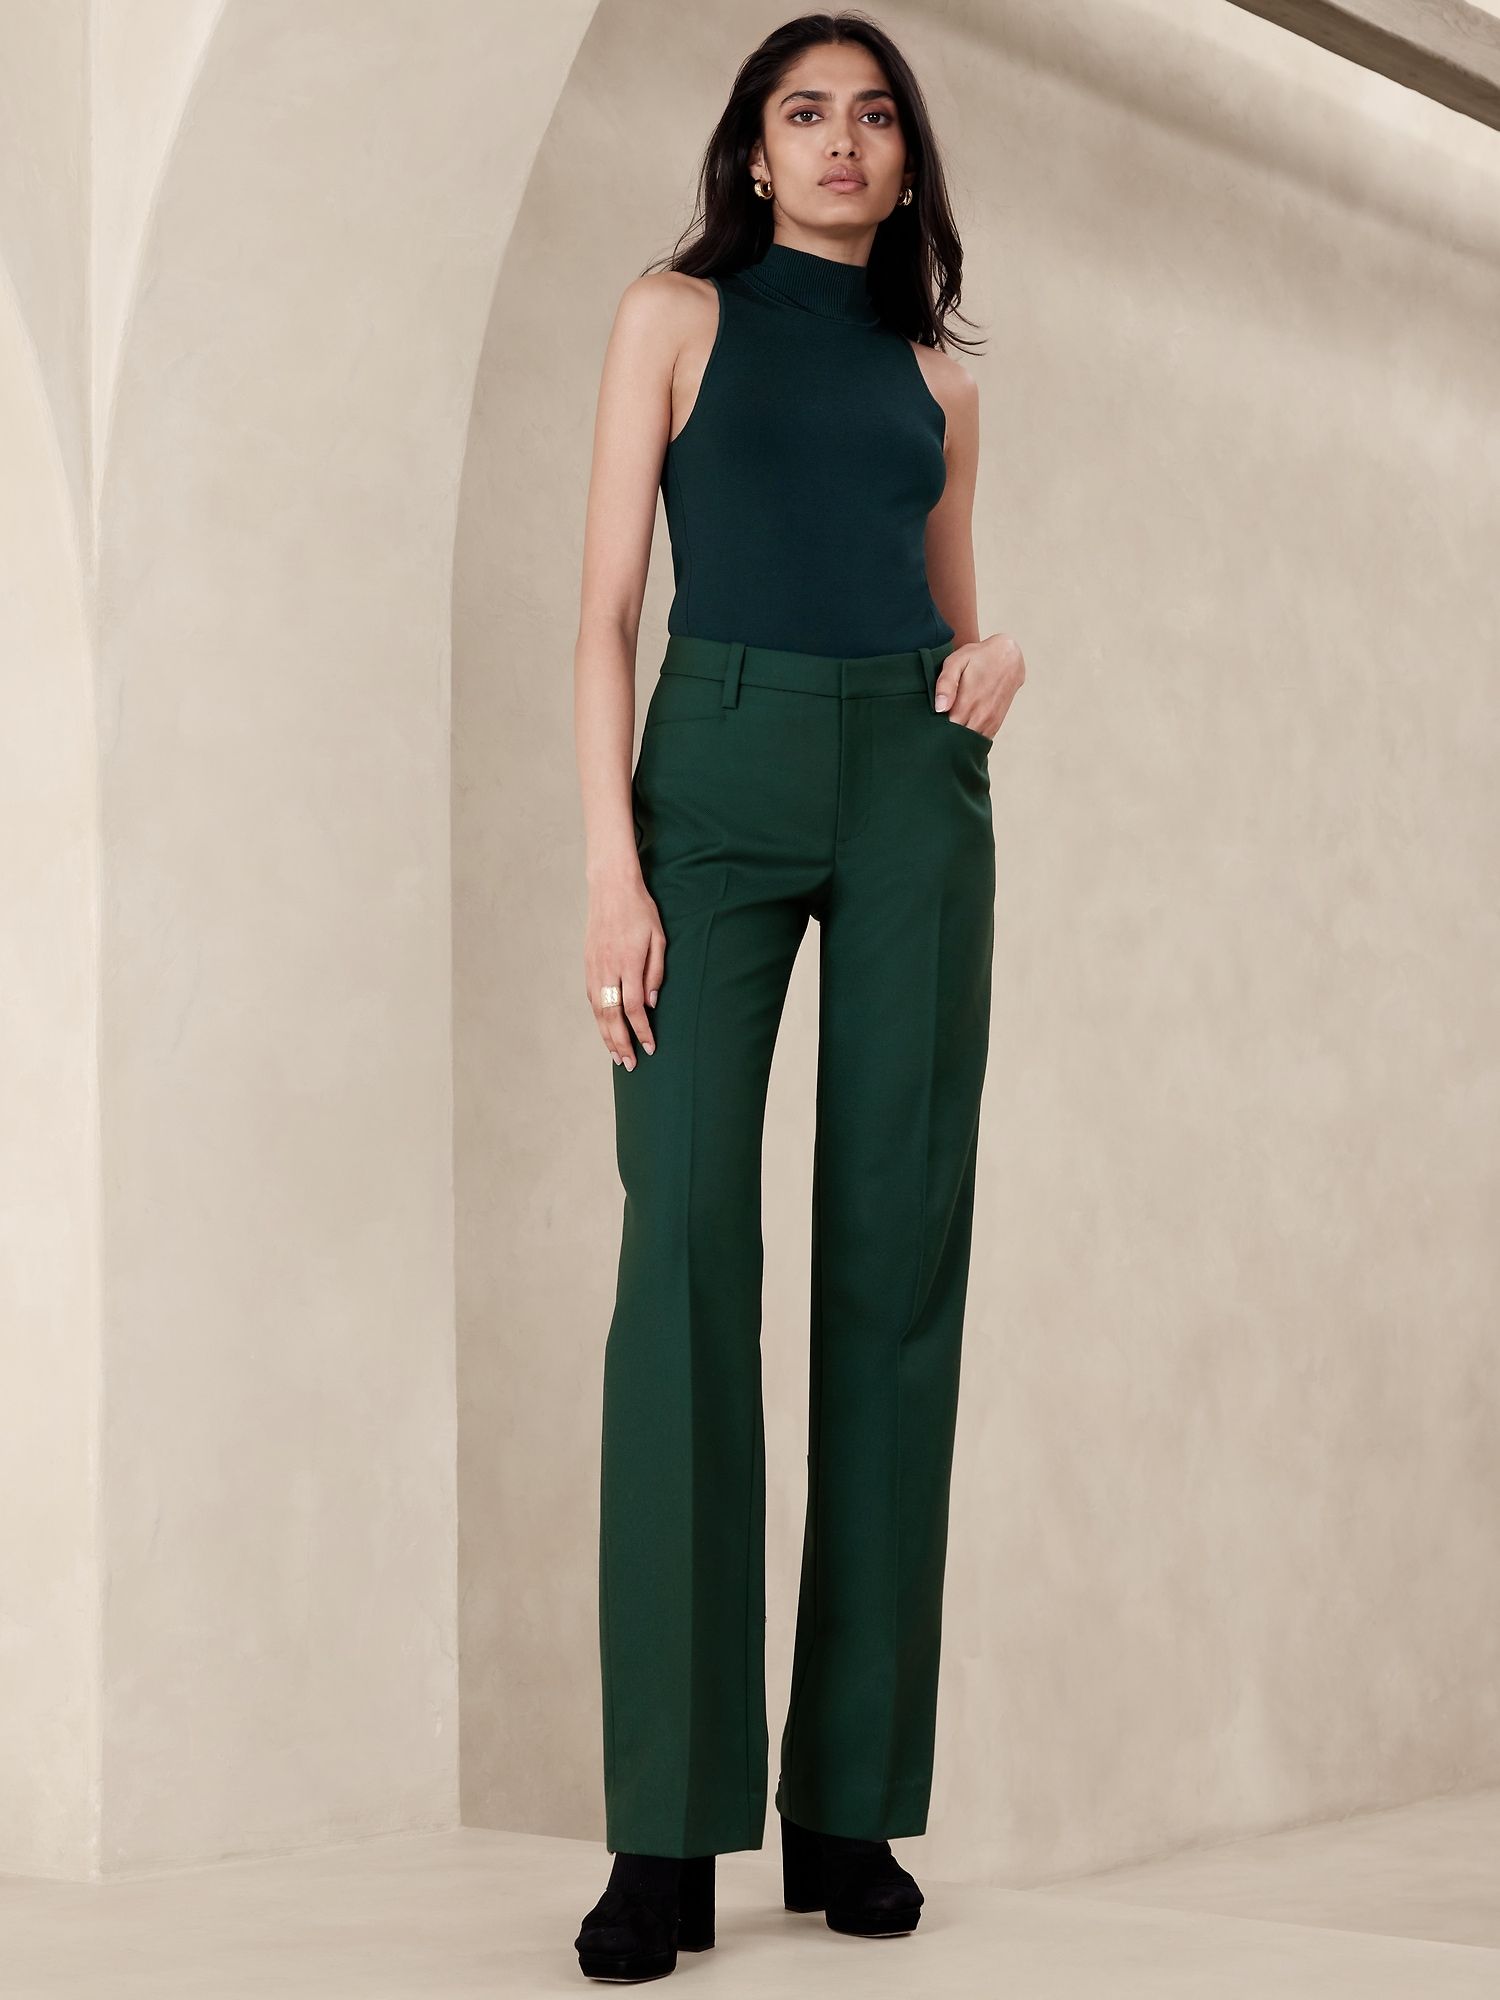 2023 My Order Placed by me Recently High Waisted Corduroy Pants for Women  Vintage Flare Pants Bell Bottom Trousers with Pockets Wide Leg Casual Pants  Army Green at Amazon Women's Clothing store